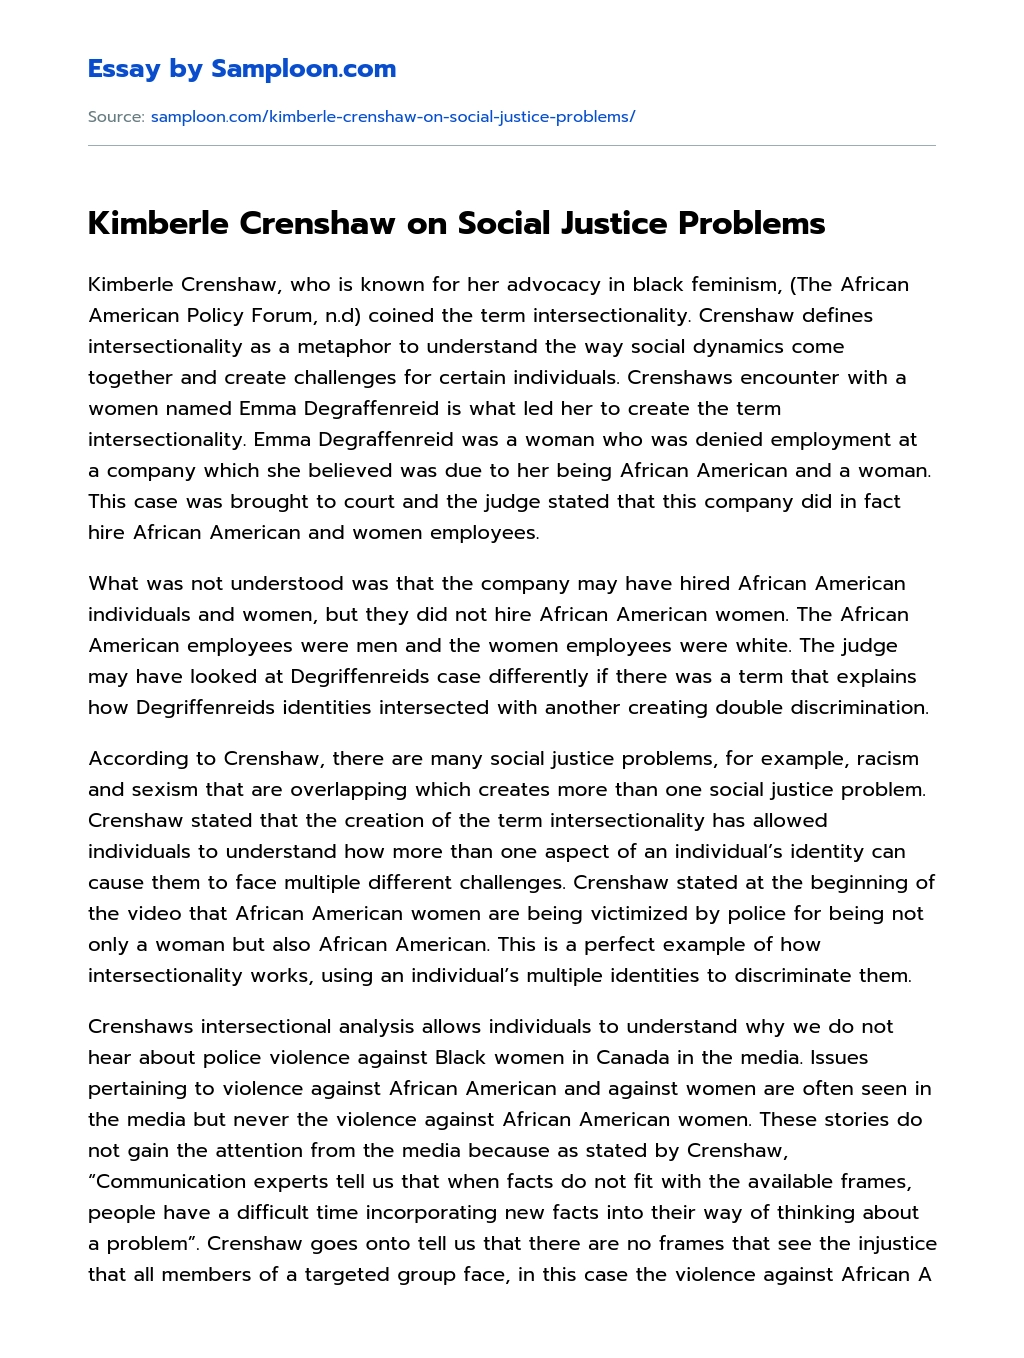 Kimberle Crenshaw on Social Justice Problems essay